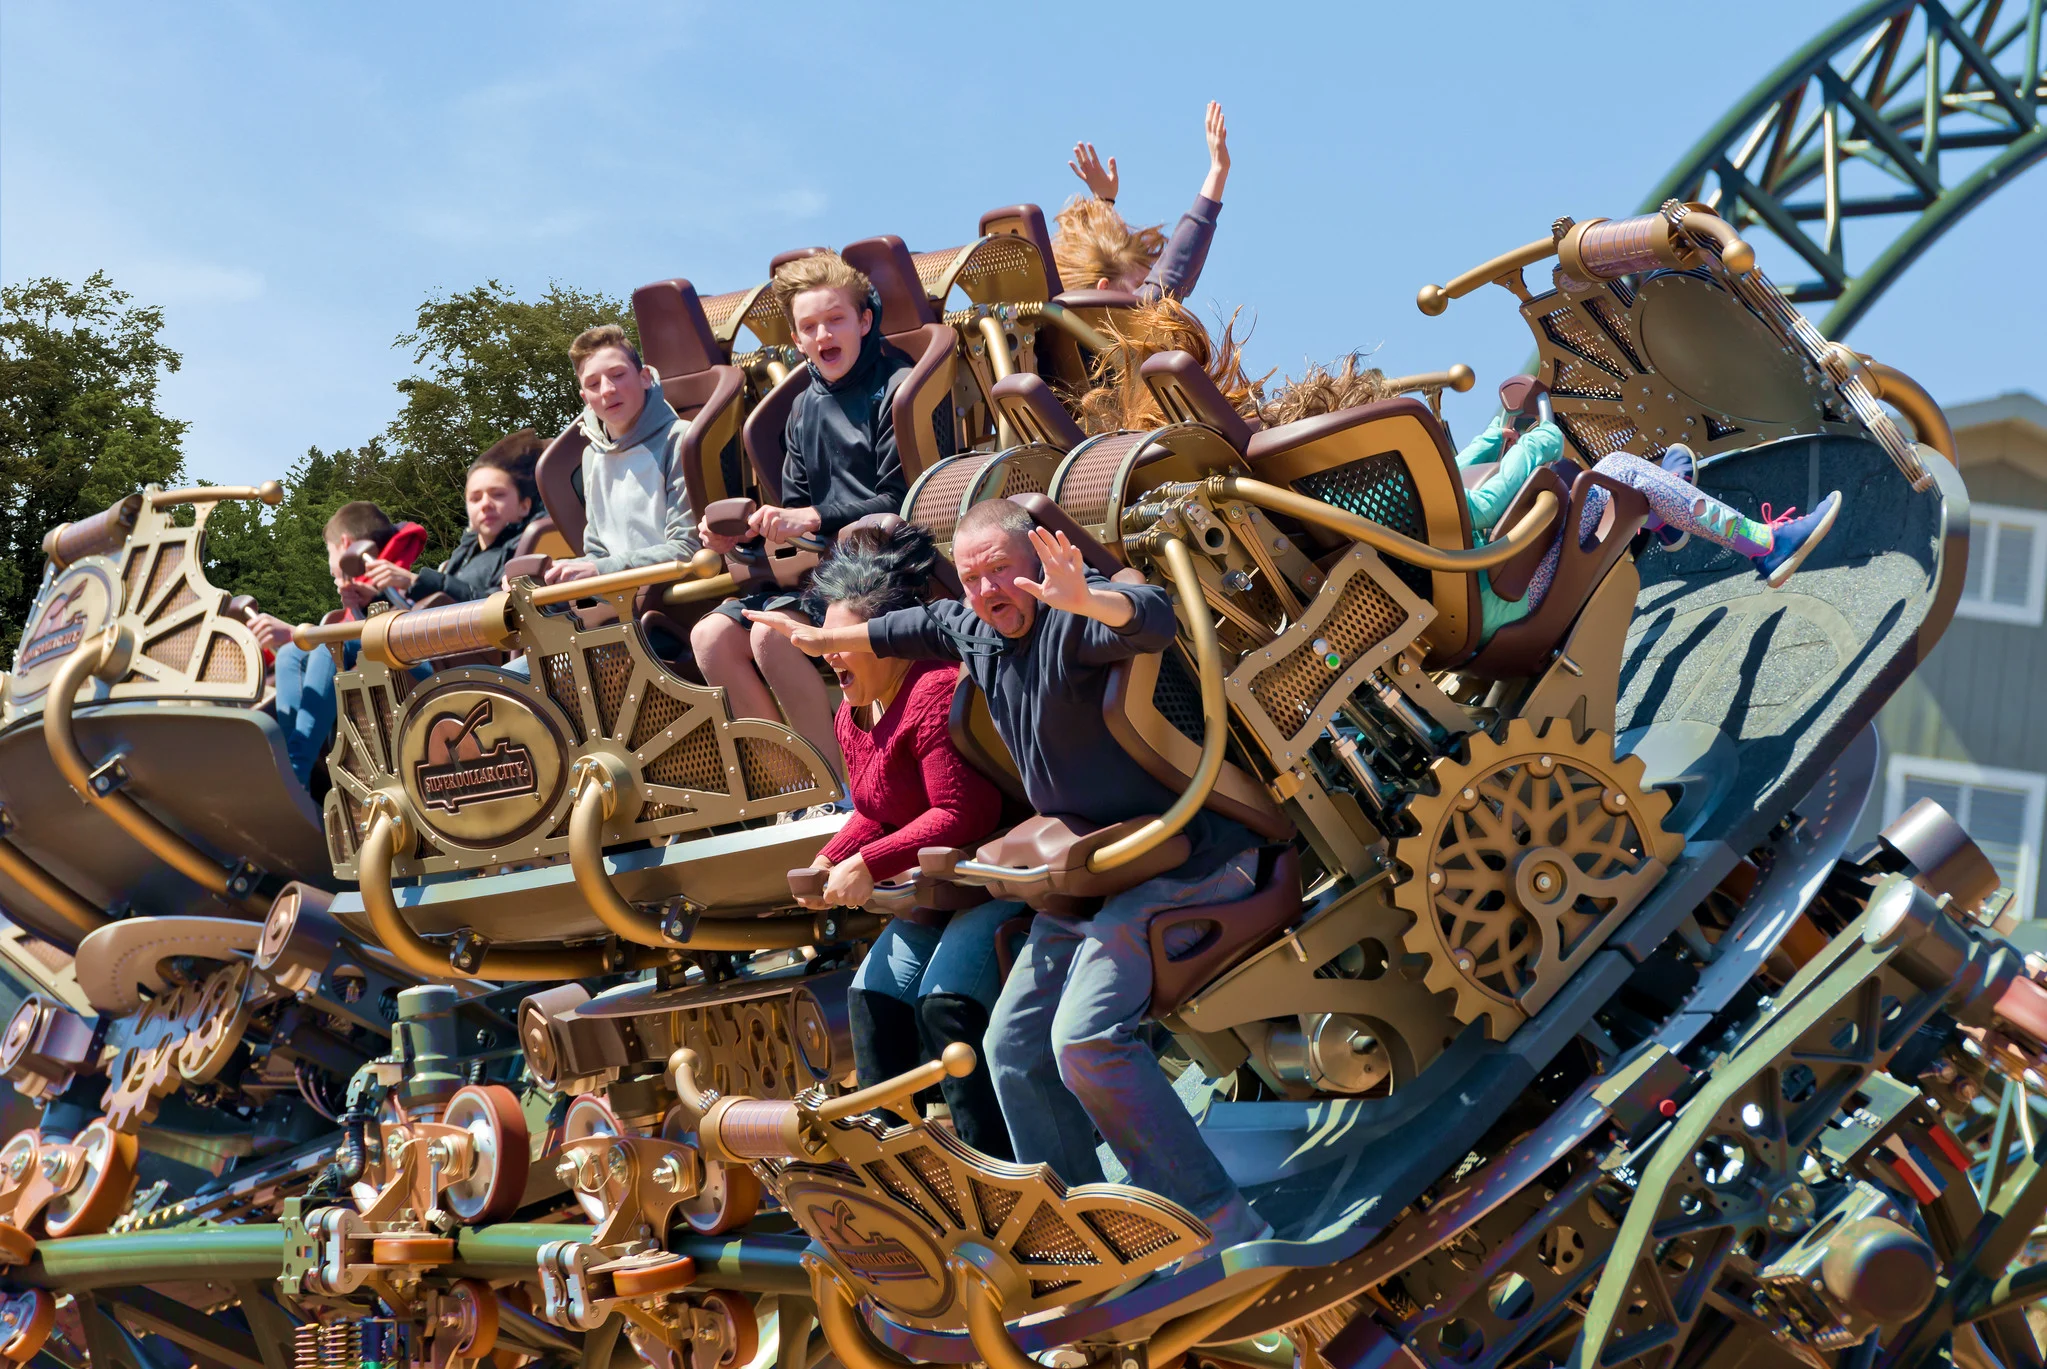 Visitors thrilled while riding the steampunk-themed roller coaster ride at Silver Dollar City in Branson, Missouri, titled one of the best roller coaster parks in the US